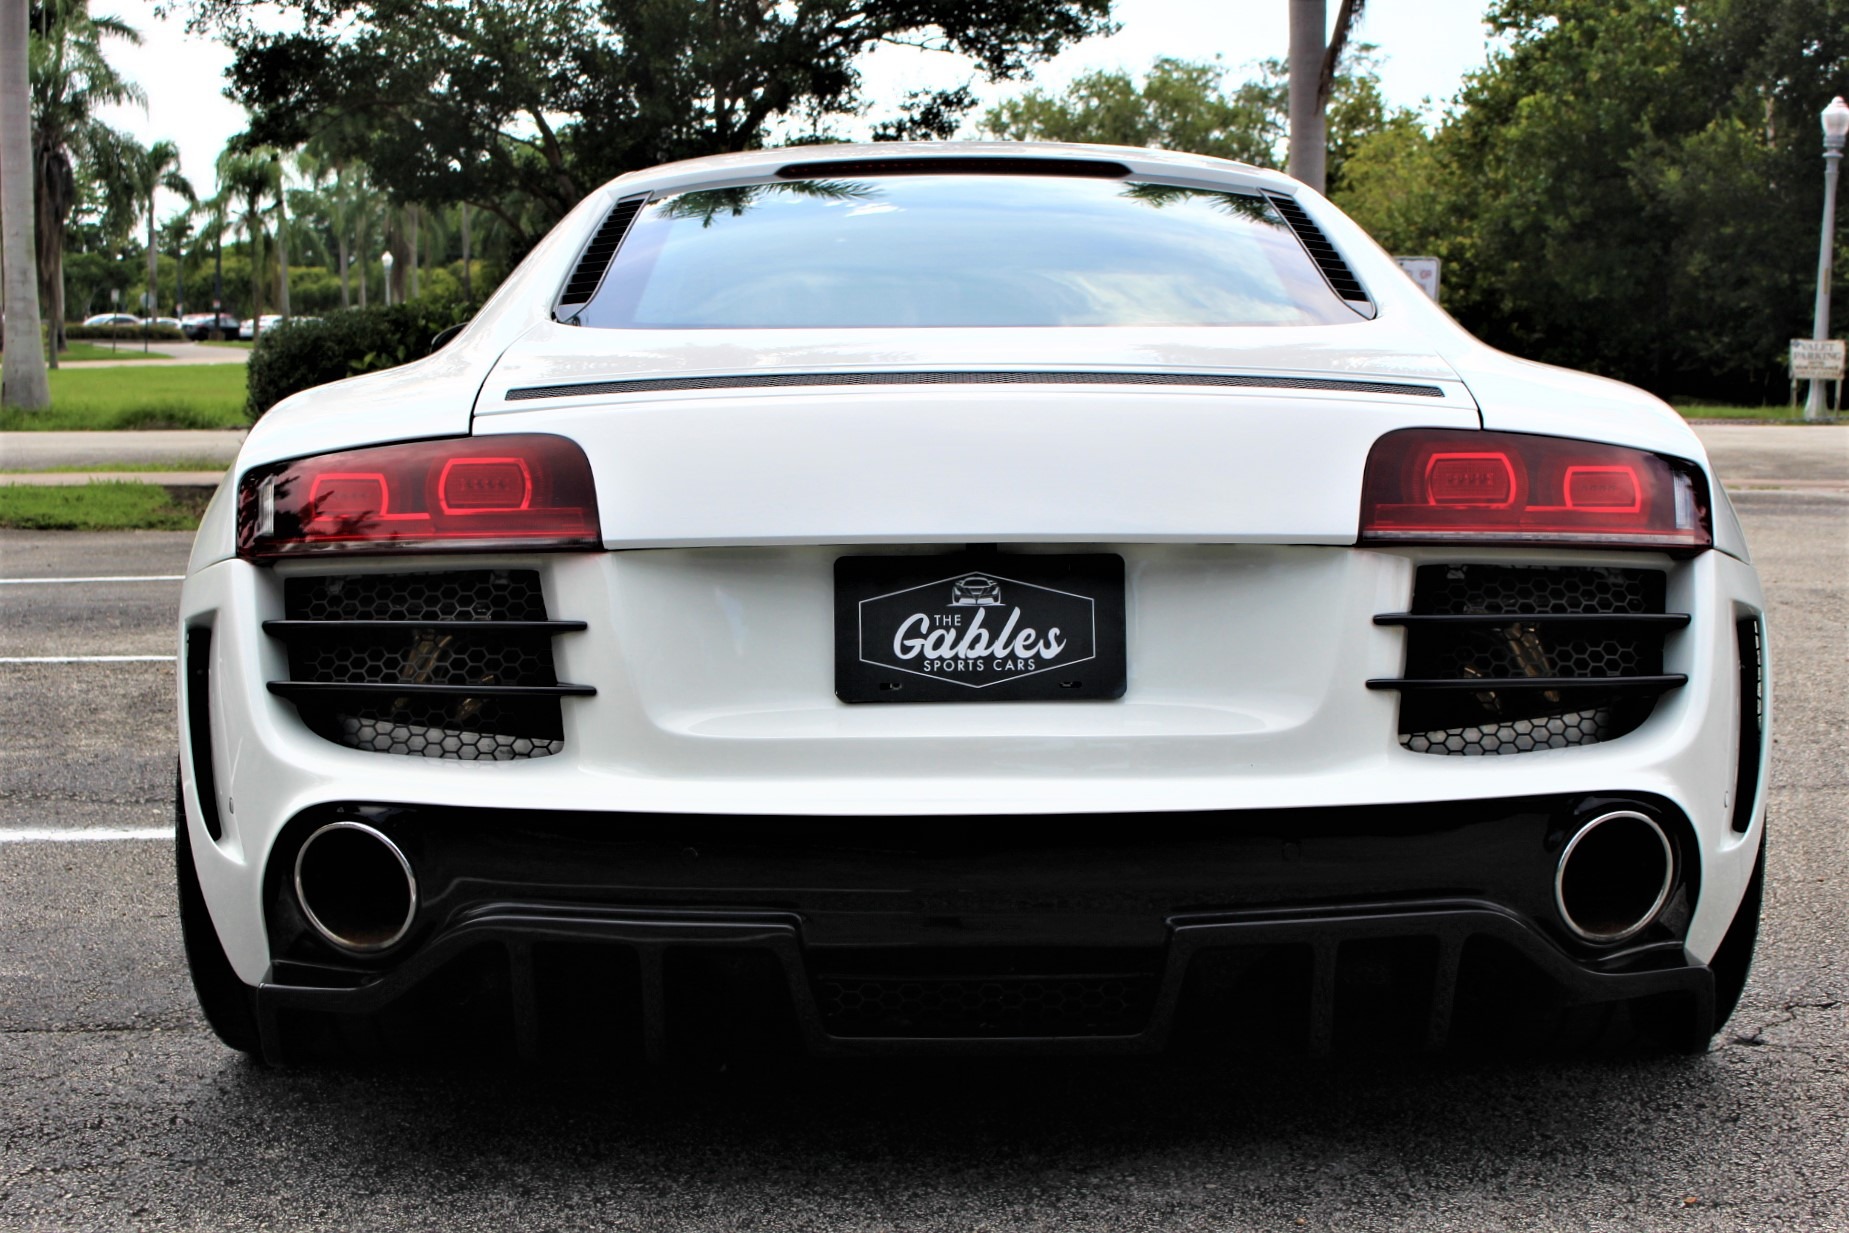 Used 2010 Audi R8 5.2 quattro for sale Sold at The Gables Sports Cars in Miami FL 33146 3